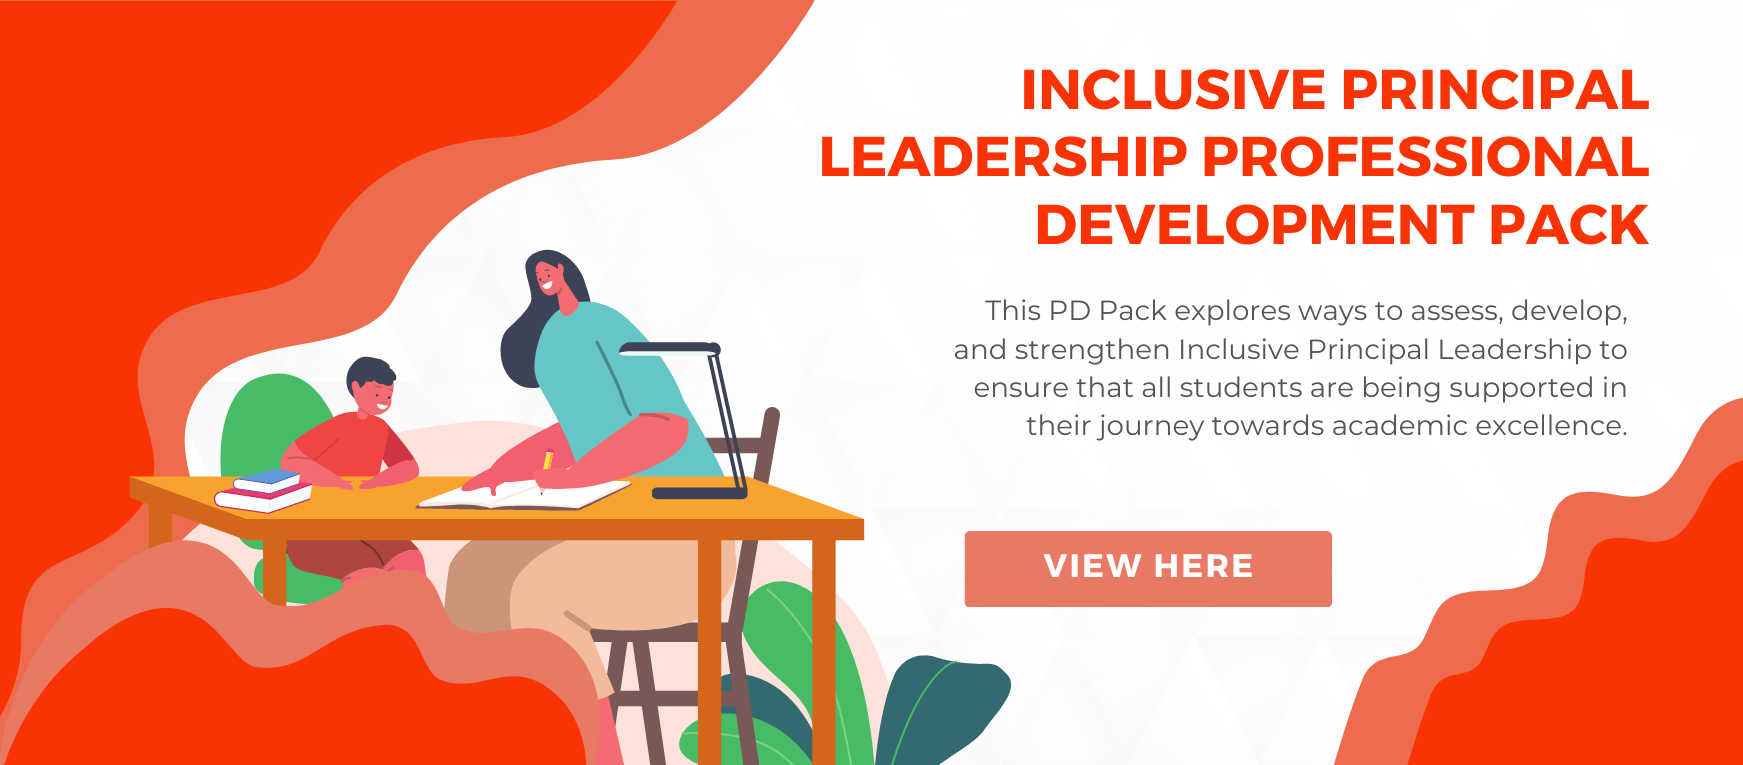 Inclusive Principal Leadership Professional Development pack. Image of teacher sitting at a desk with a student